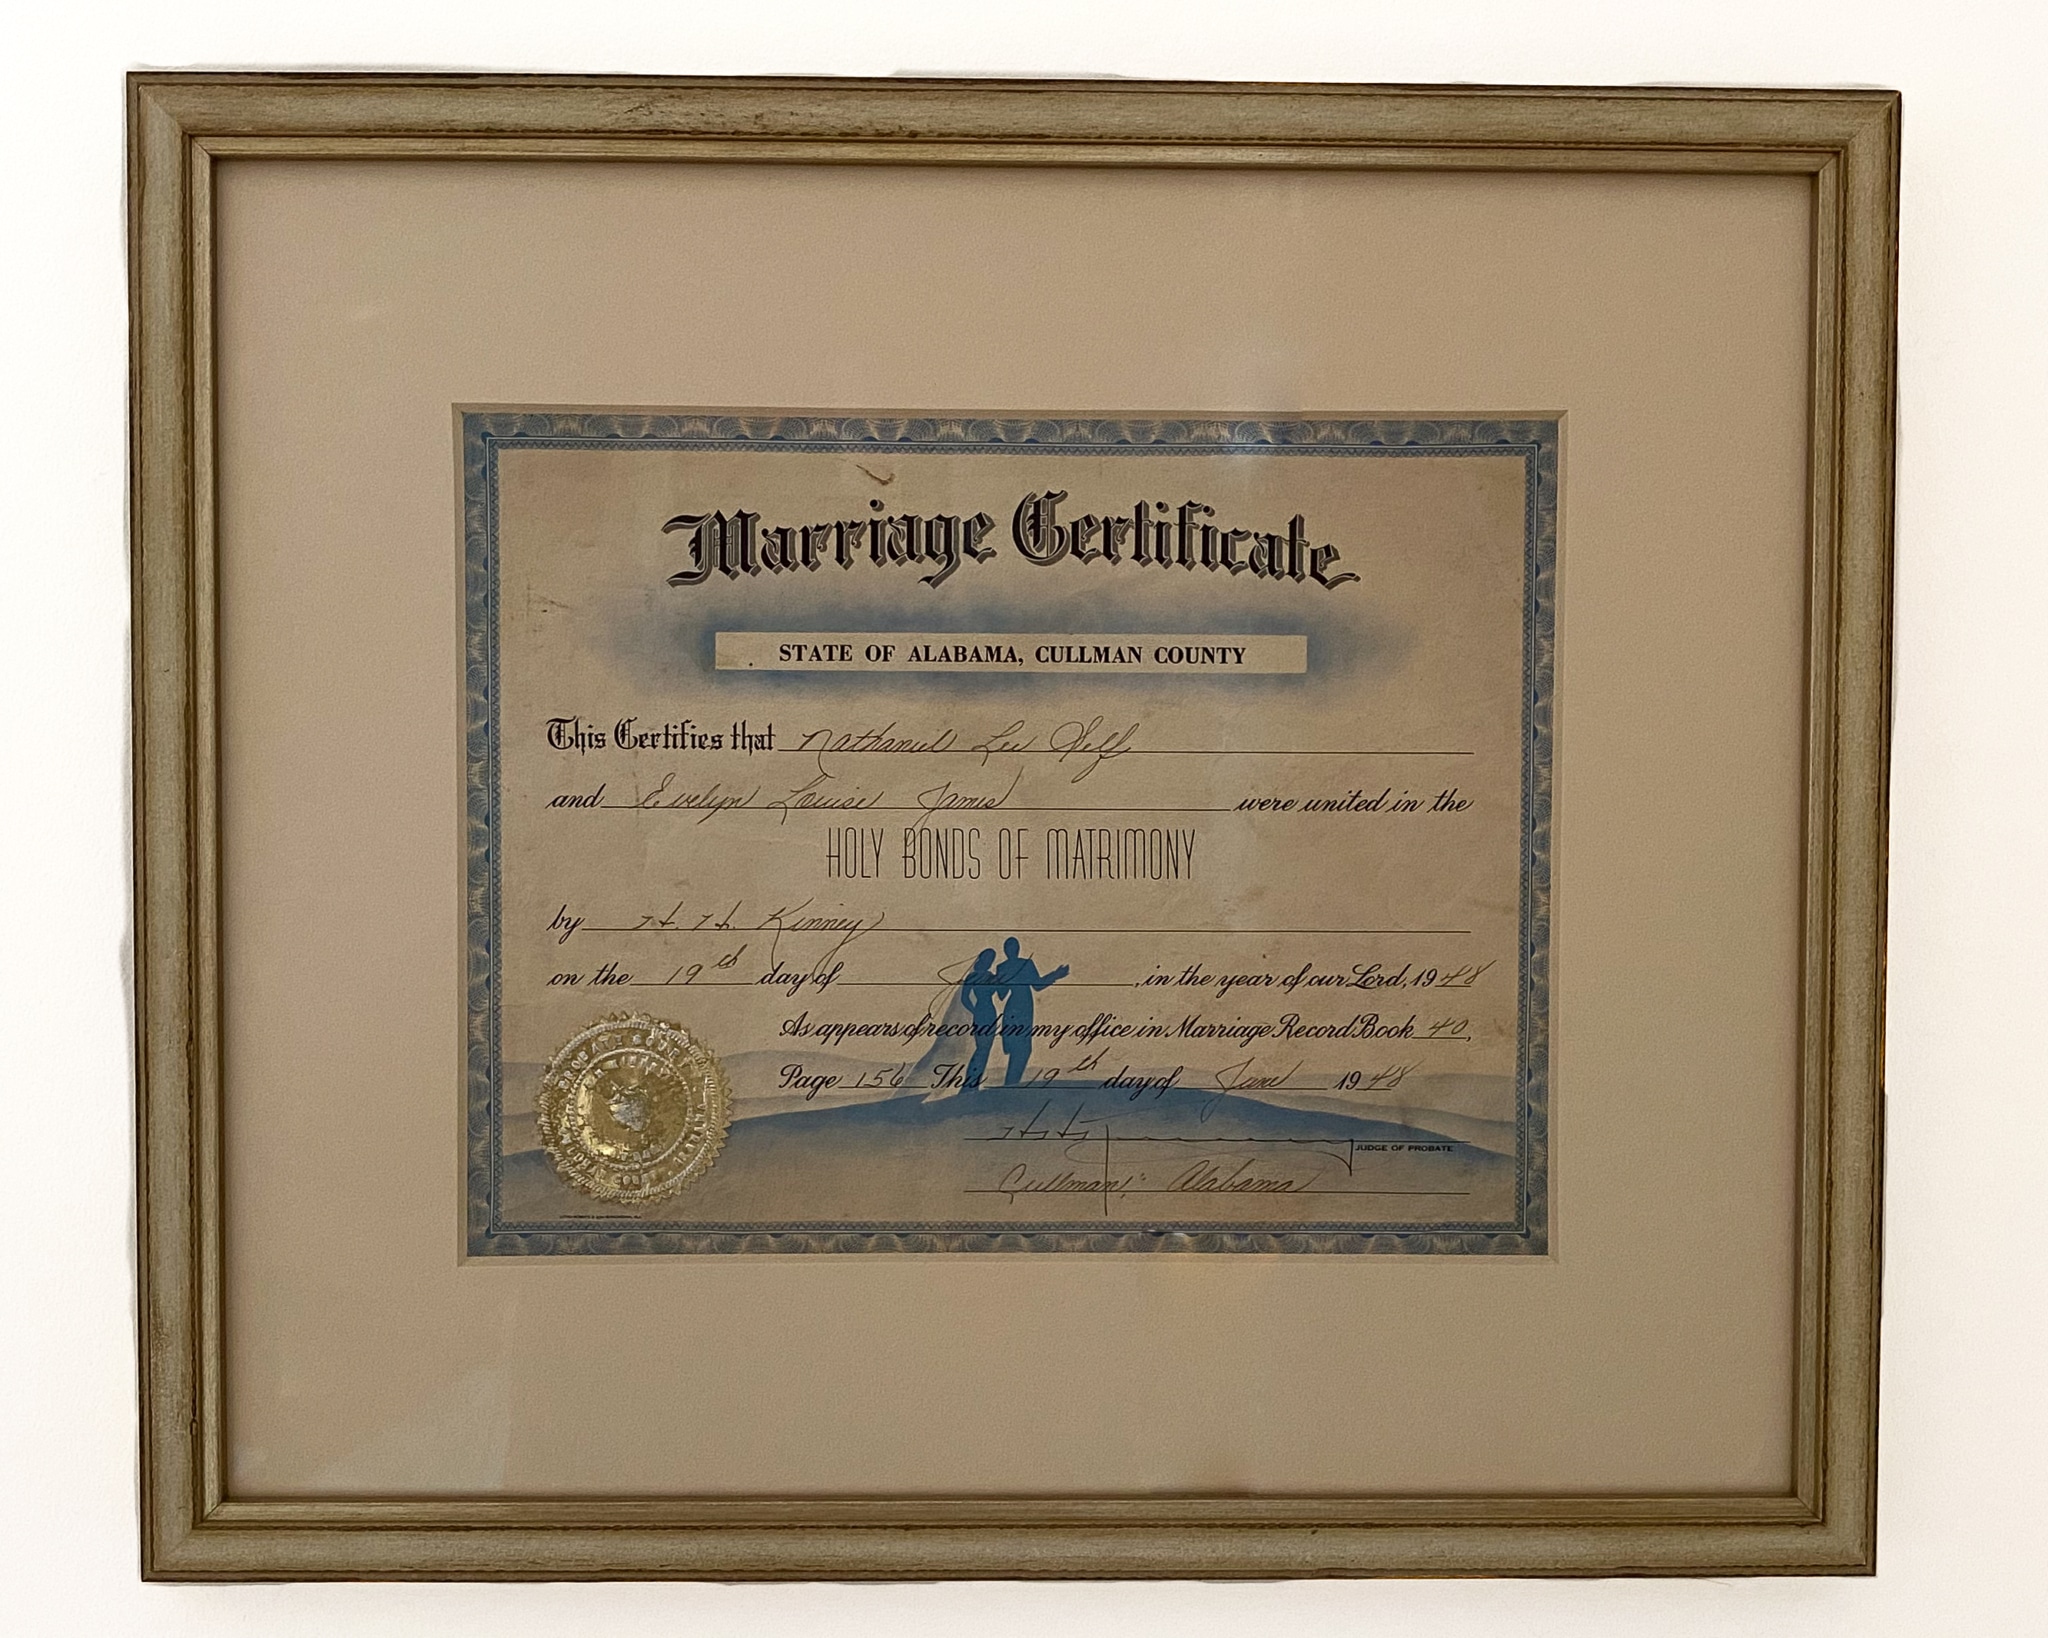 The finished product of a restored wedding certificate. It is framed and matted.